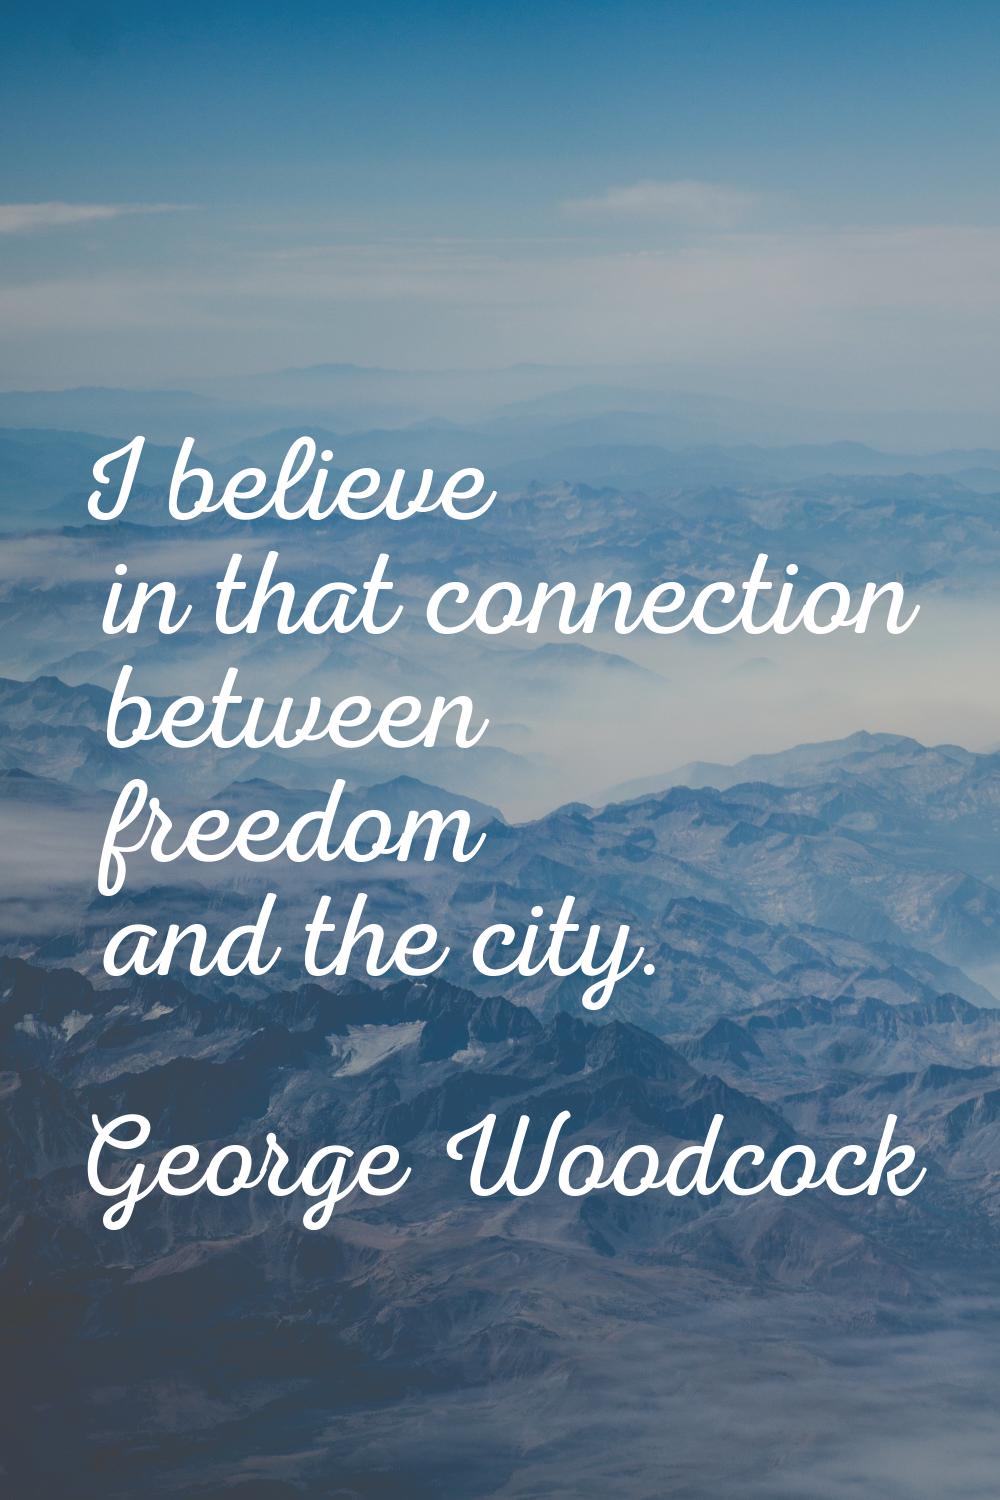 I believe in that connection between freedom and the city.